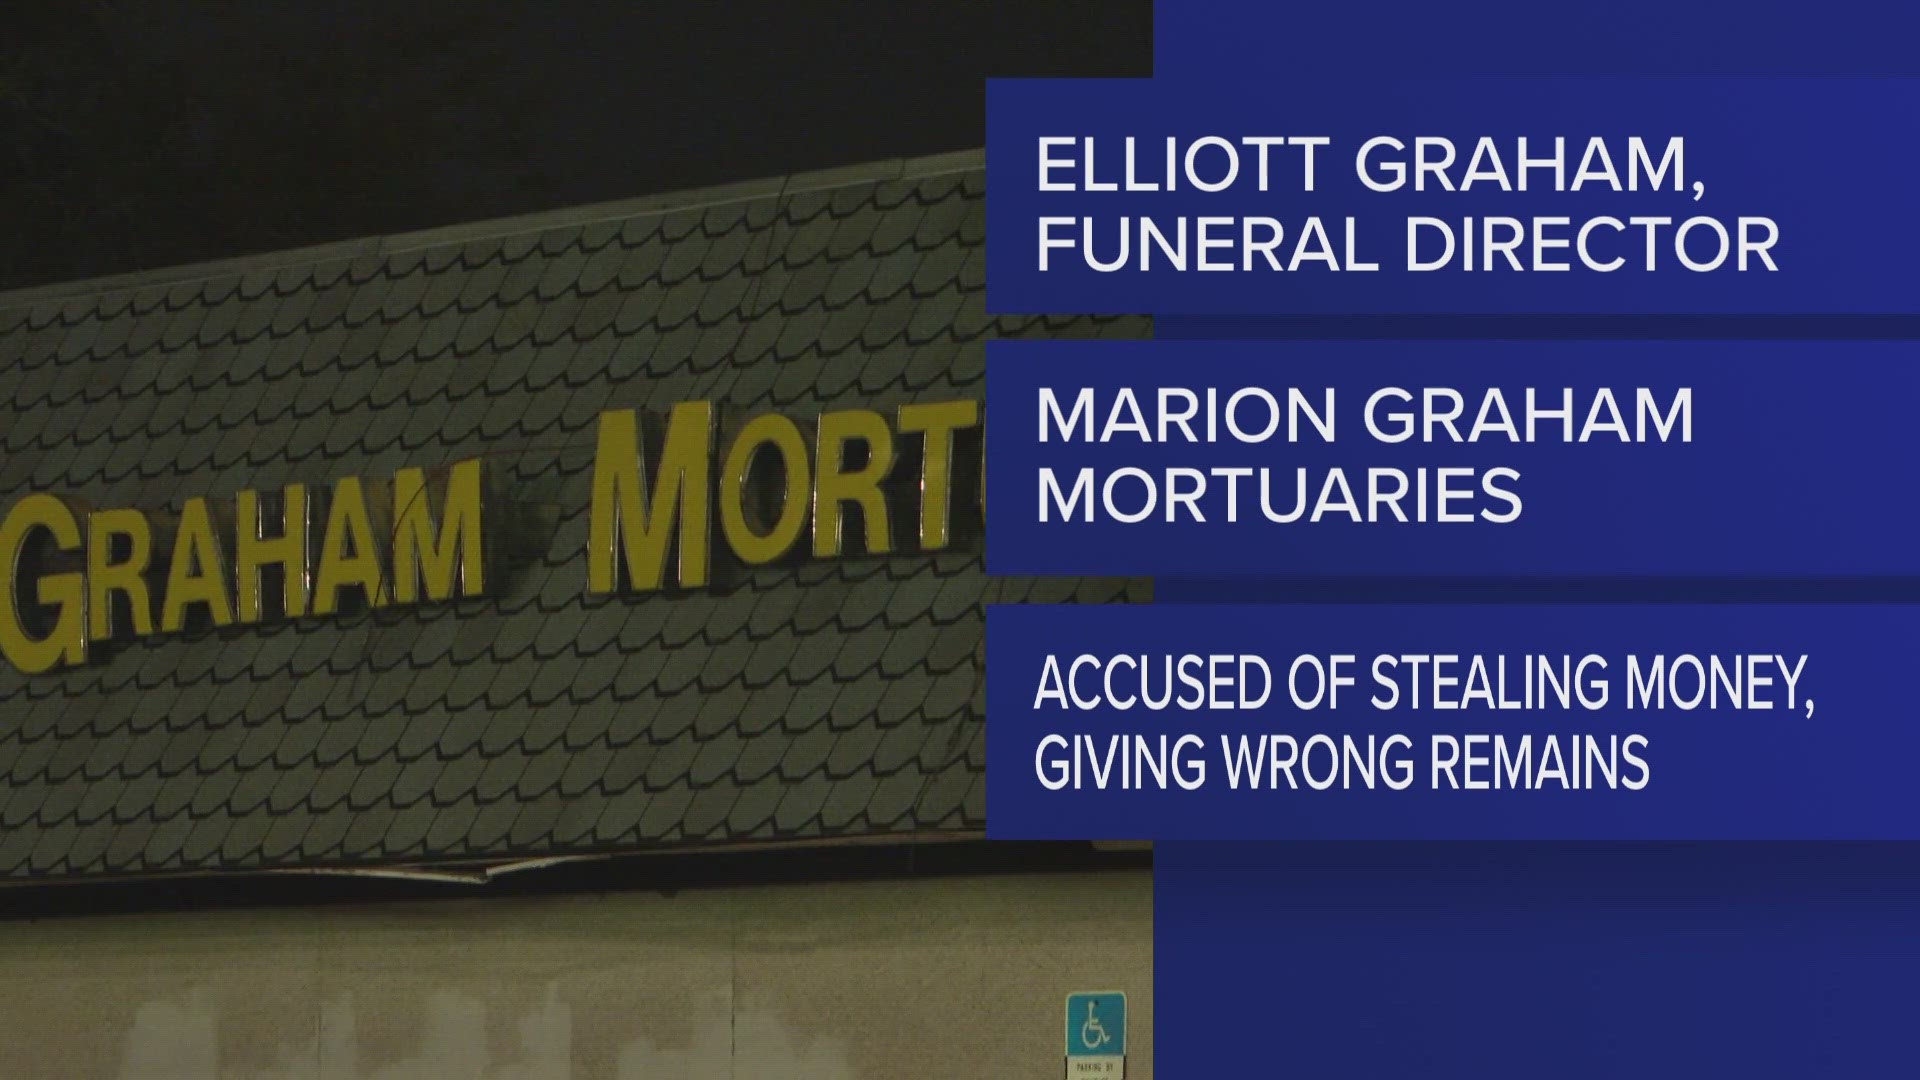 A news release from Florida CFO Jimmy Patronis says Elliot Graham was returning fake cremated remains to families. He is also accused of grand theft.